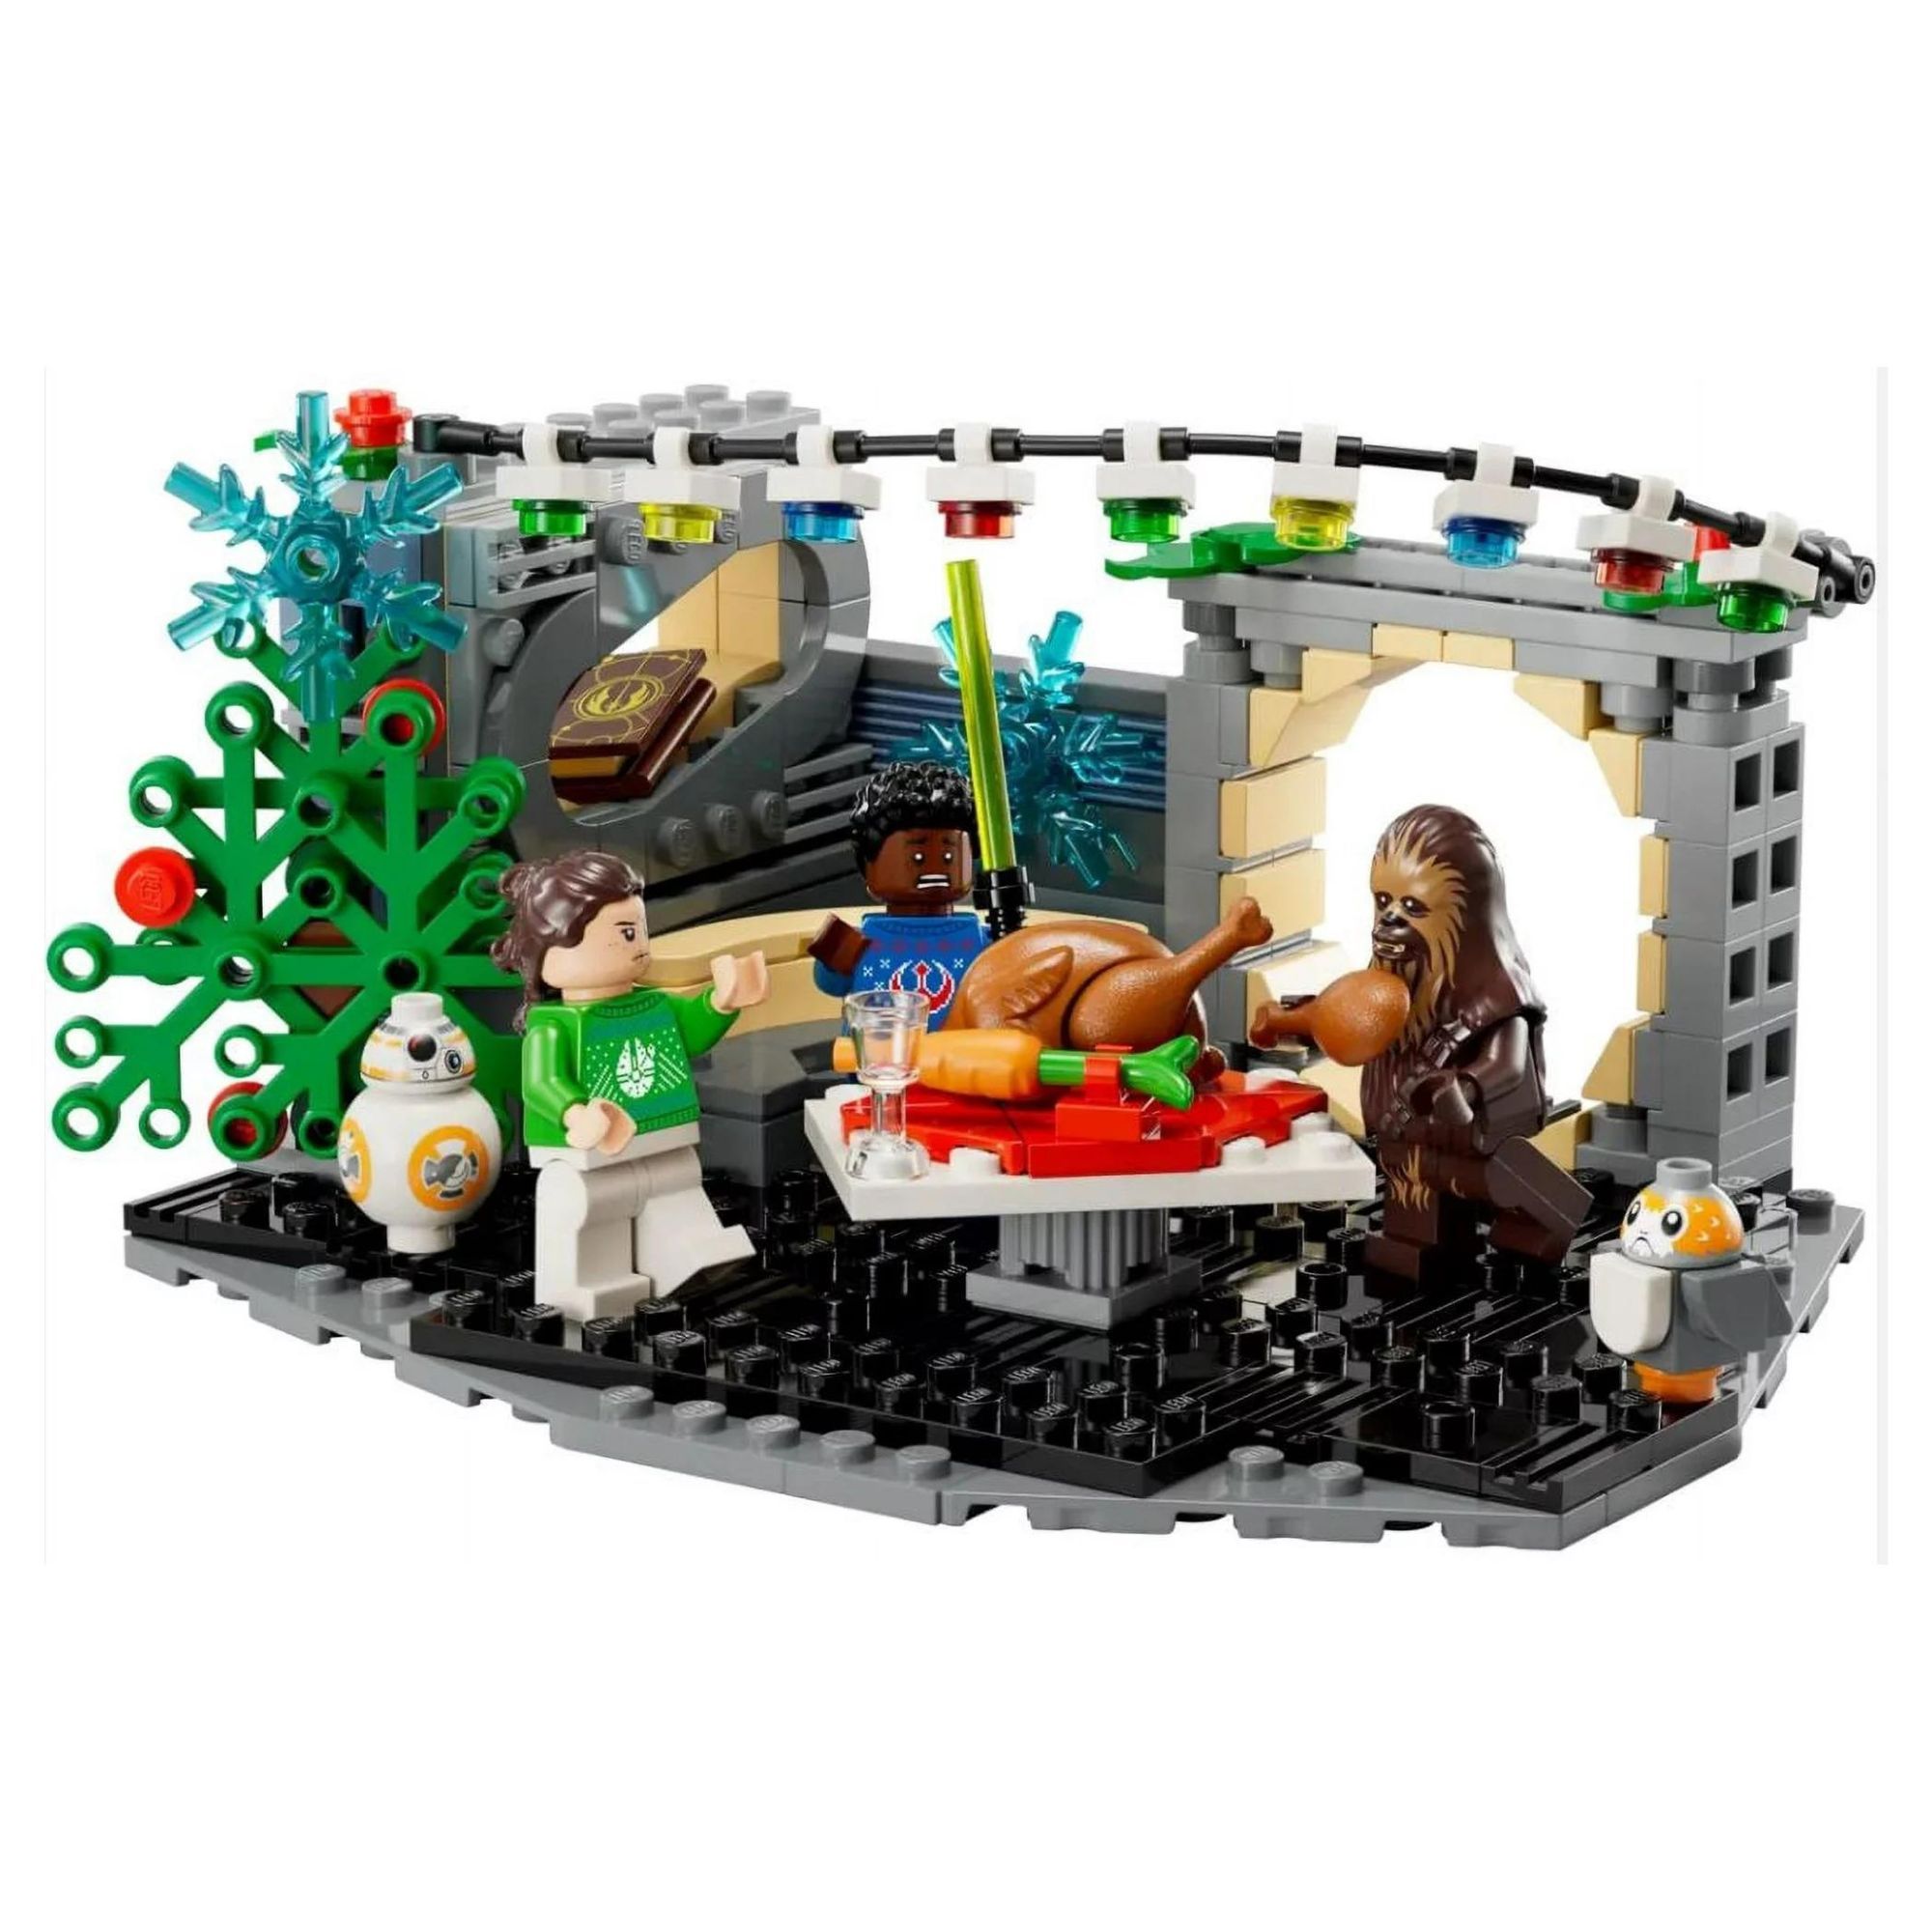 Product still for the LEGO Millennium Falcon Holiday Diorama on a white background